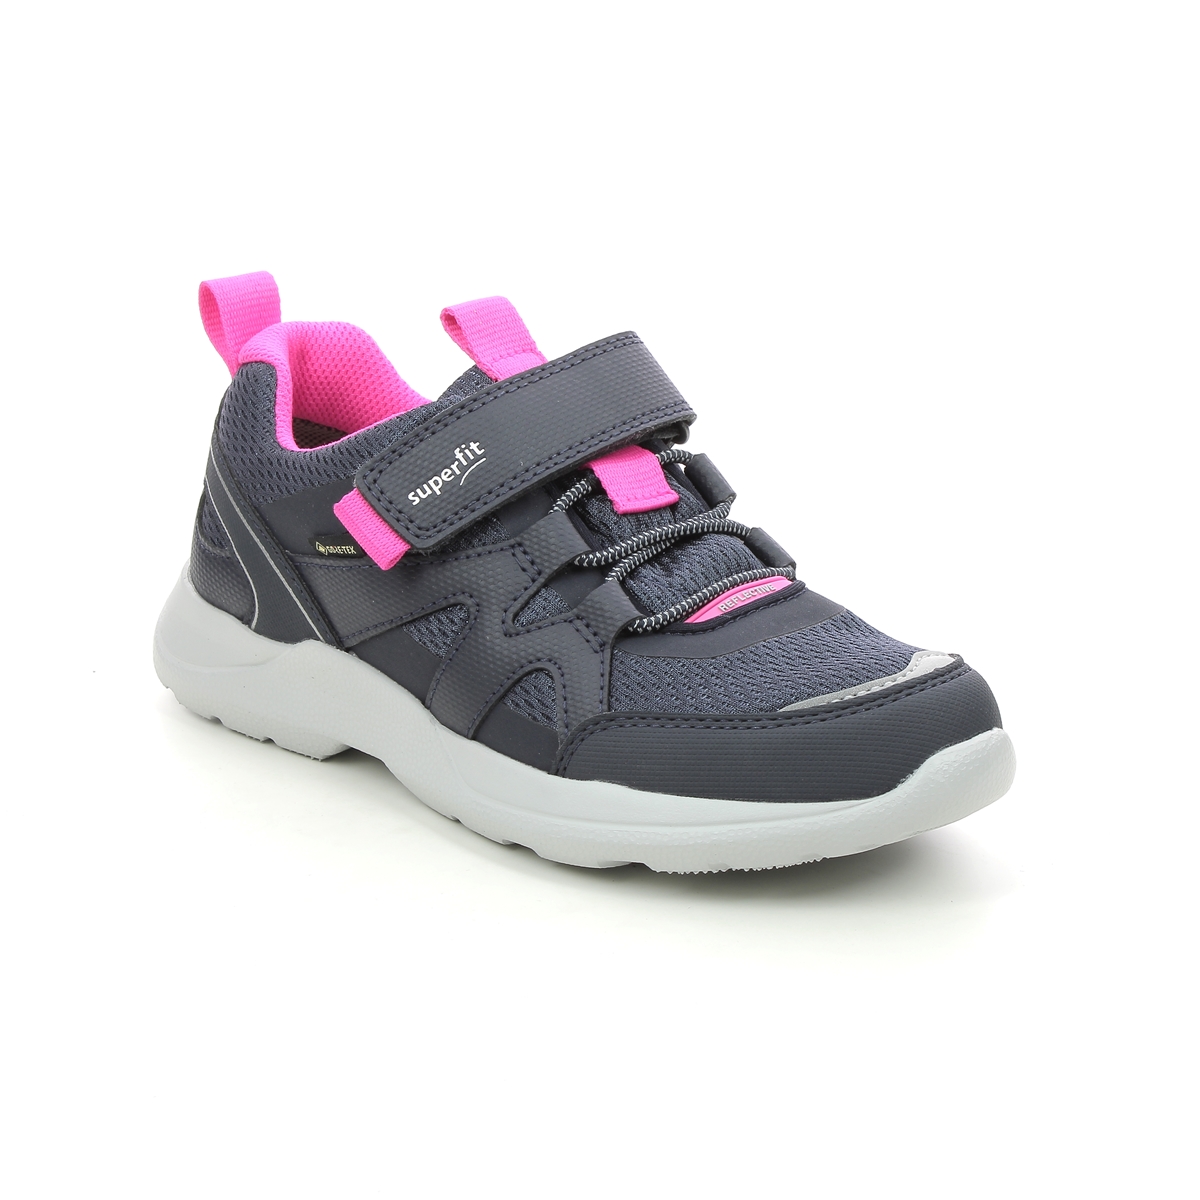 Superfit Rush Jnr G Gtx Navy Pink Kids Girls Trainers 1006219-8020 In Size 29 In Plain Navy Pink For kids